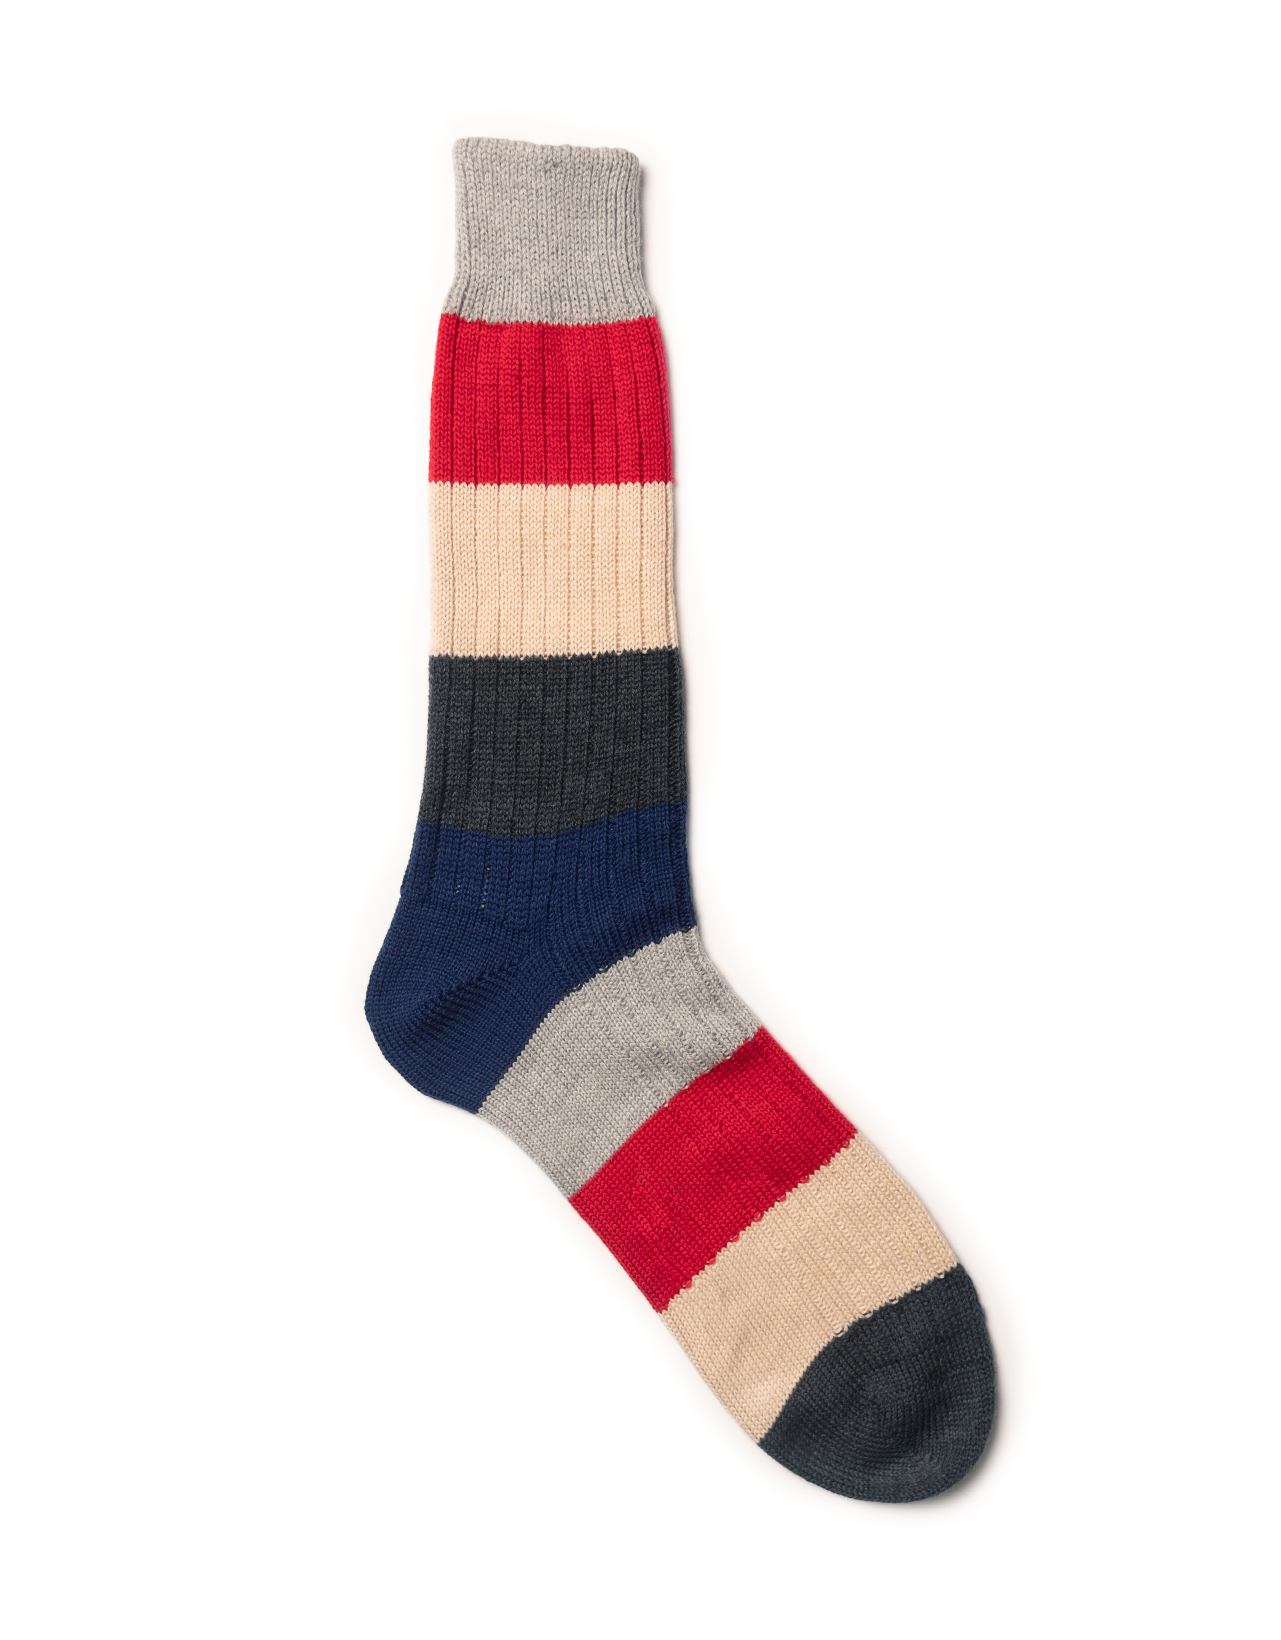 MULTI COLOR STRIPE - SILVER/RED/NATURAL/CHARCOAL/BLUE